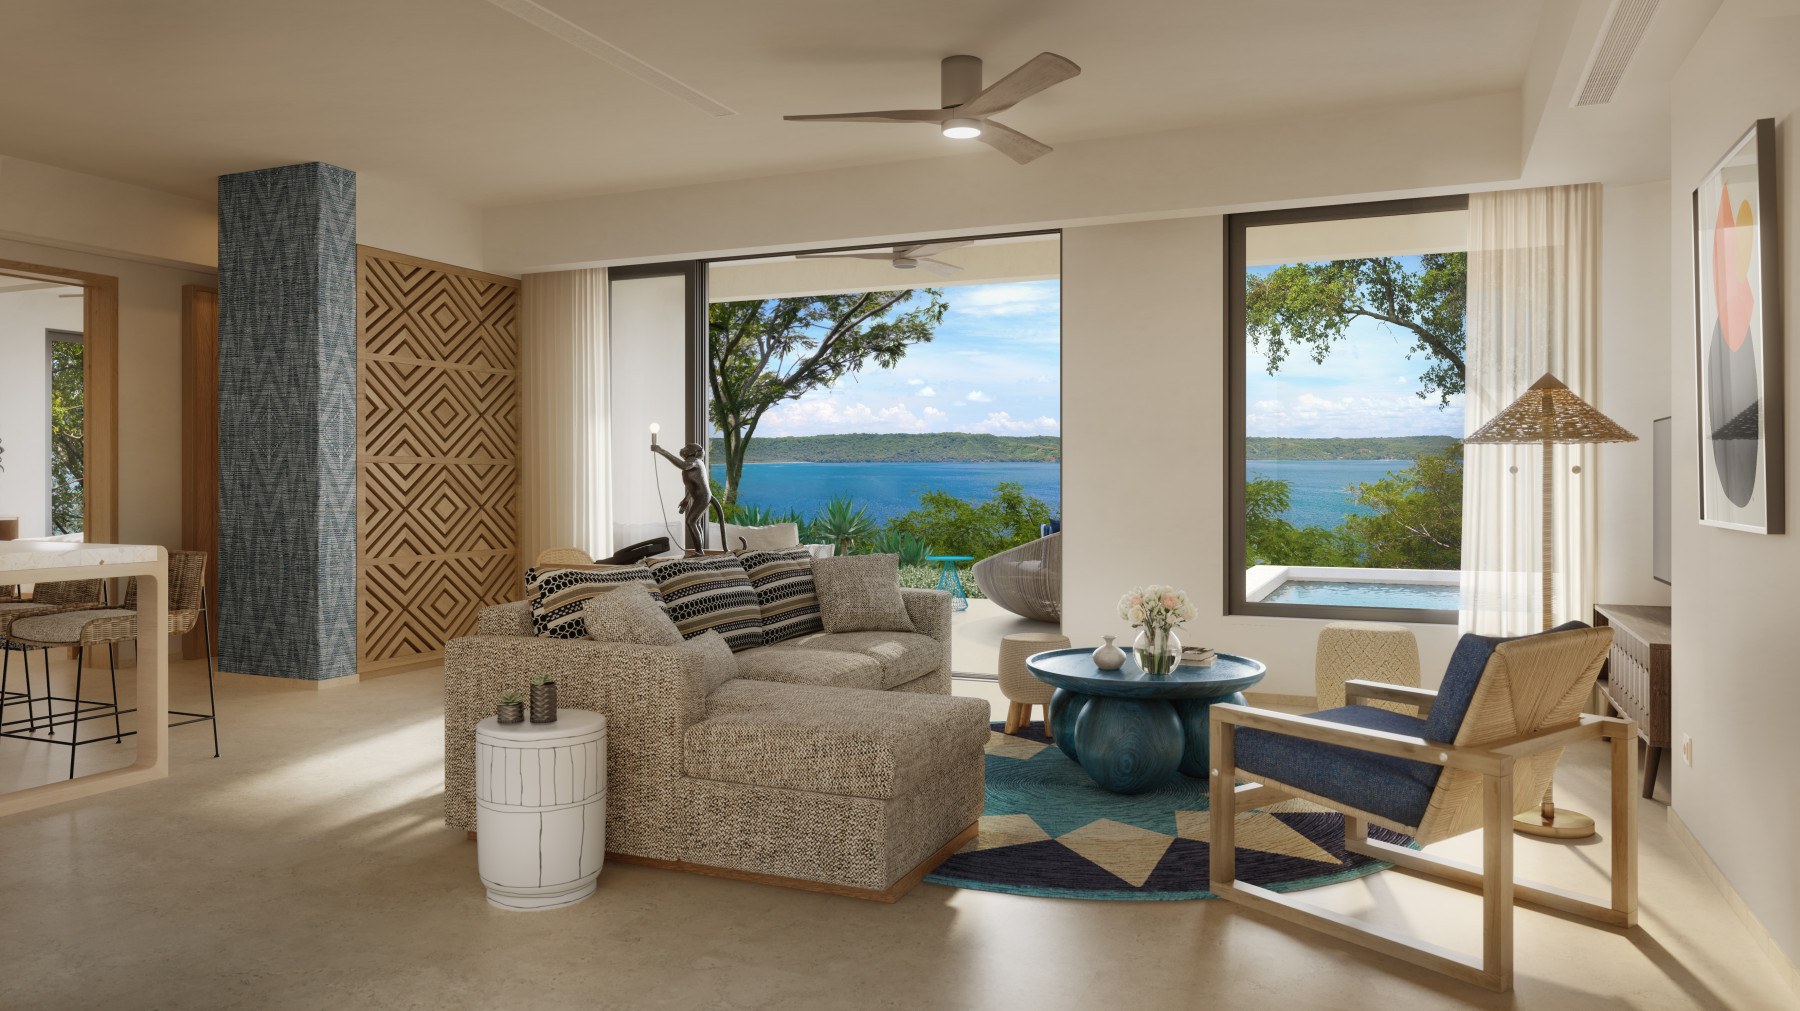 The Andaz Residences at Peninsula Papagayo: Second Homes Seen Differently